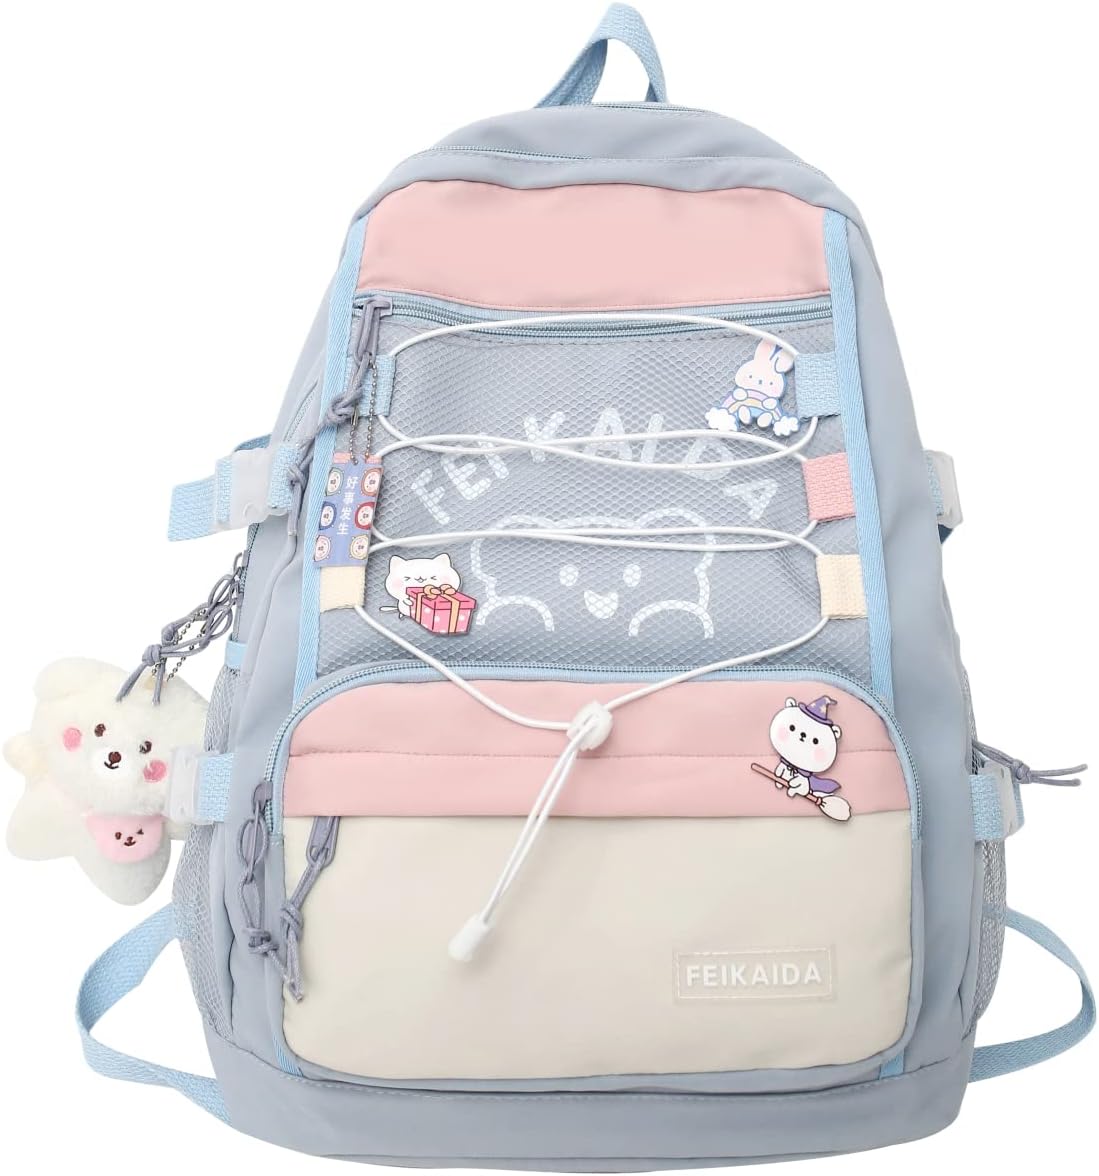 ALAZA Japanese Cherry Blossom Sakura Large Backpack for Girls Kids School  Women Personalized Laptop iPad Tablet Travel School Bag with Multiple